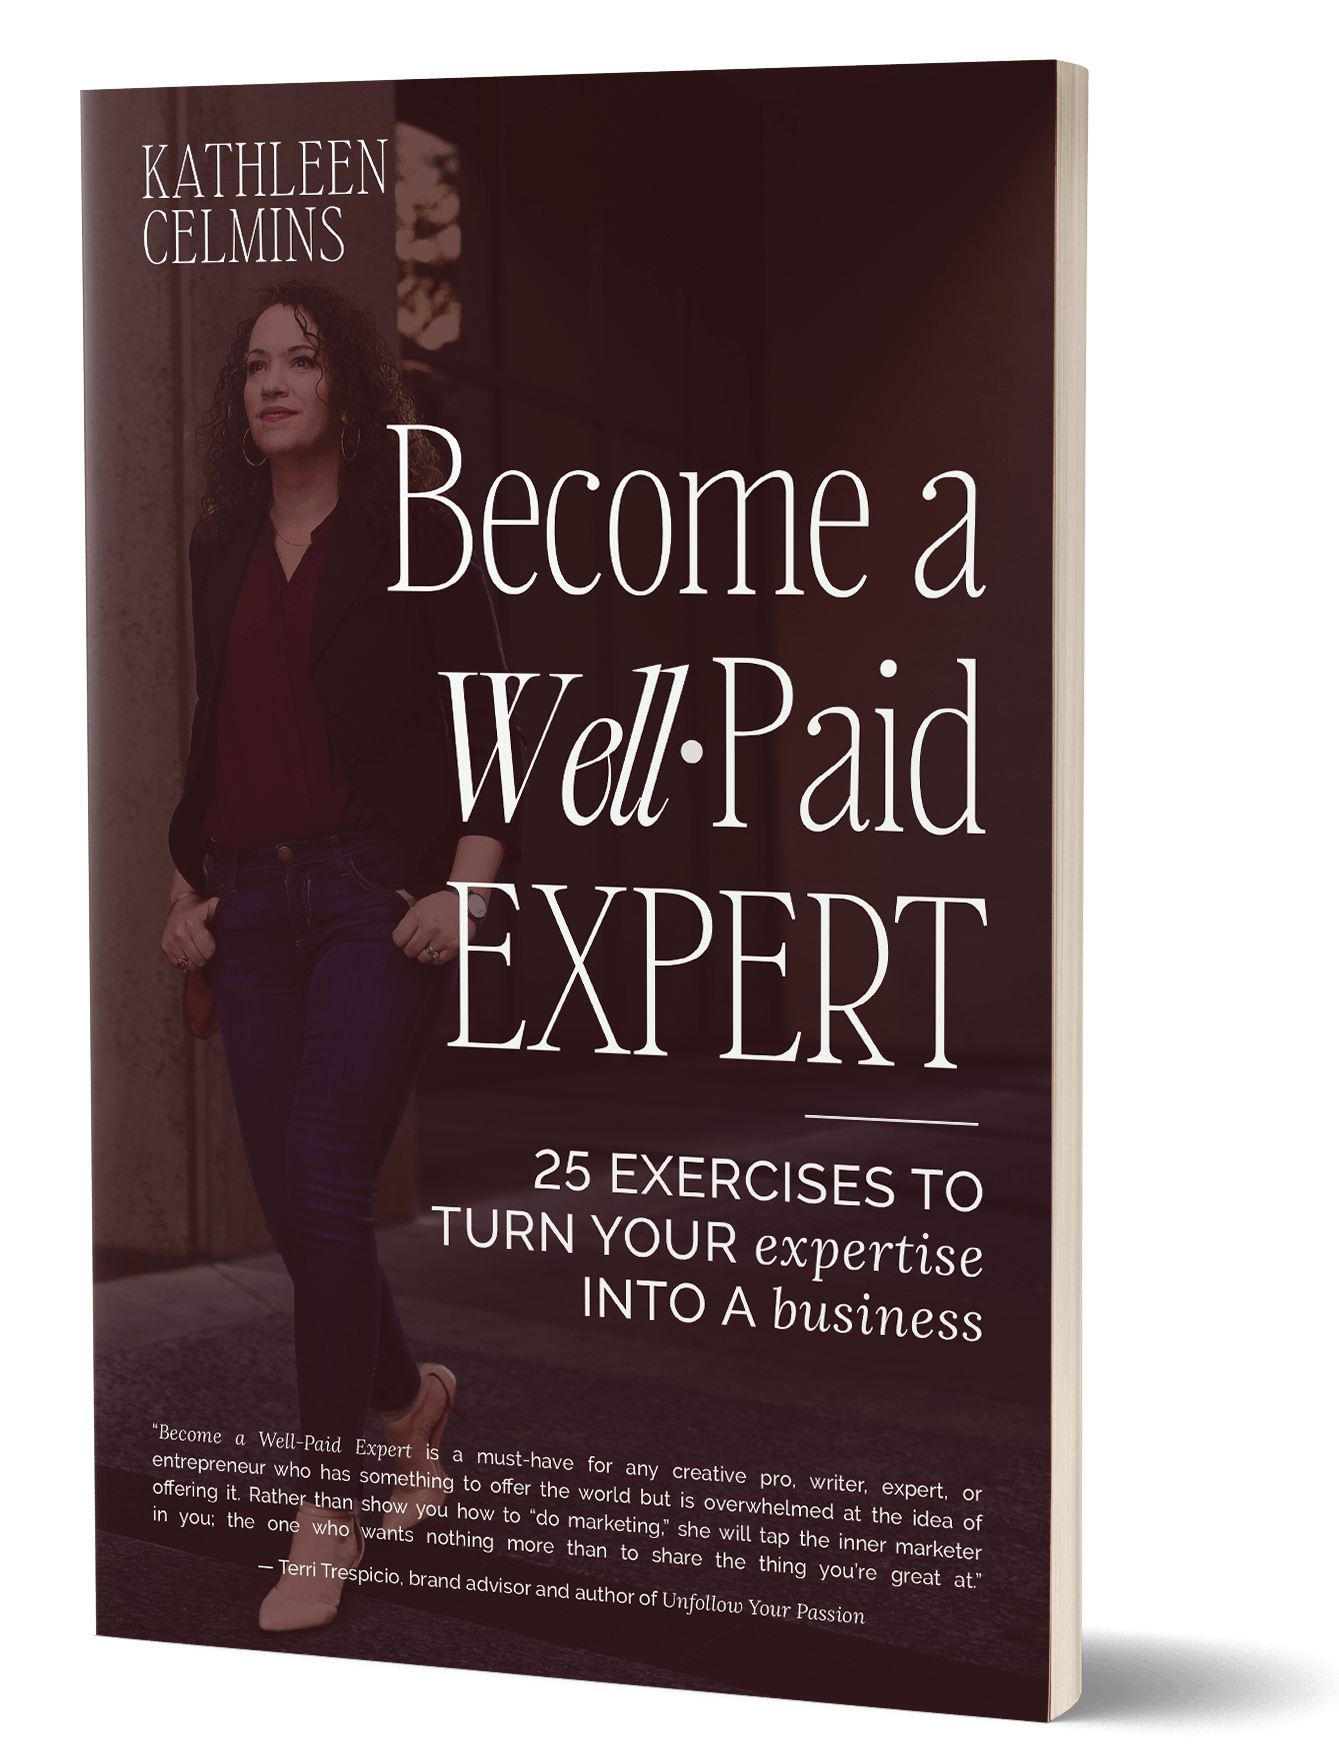 3D rendition of the cover of Become a Well-Paid Expert: 25 Exercises to Turn Your Expertise into a Business